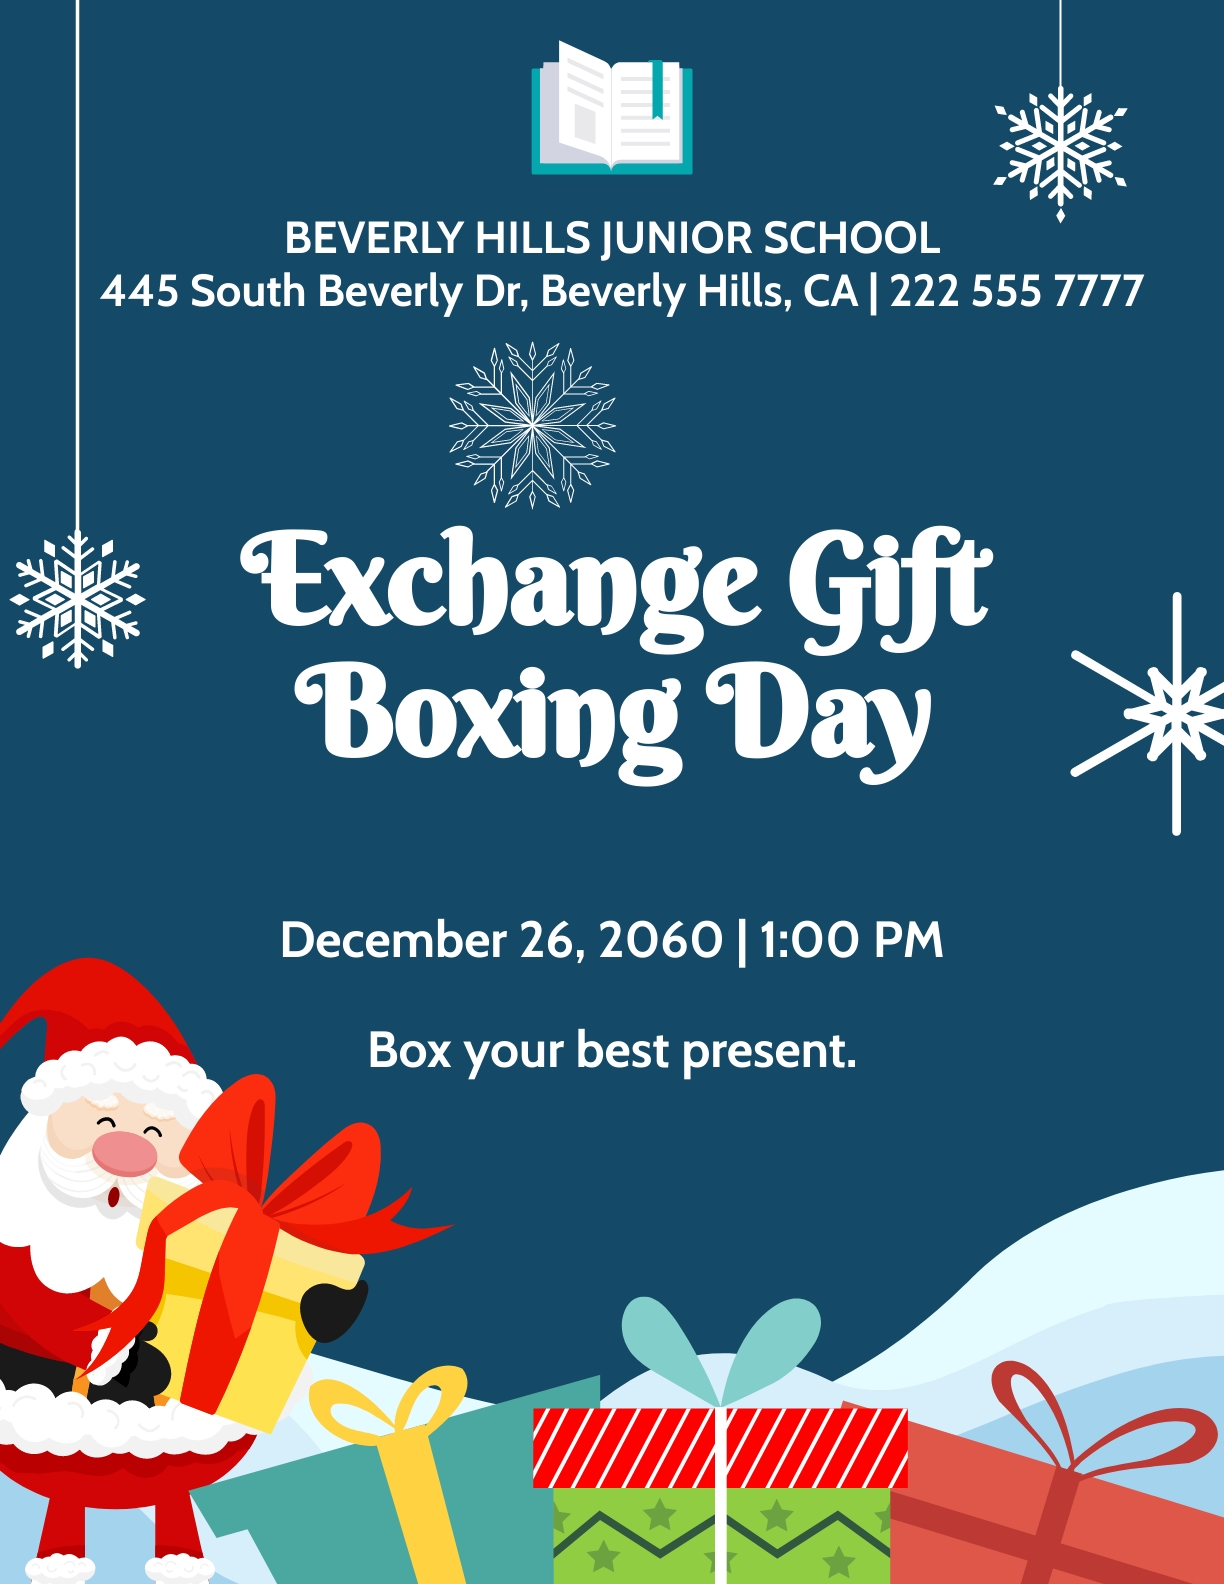 Free Party Boxing Day Flyer in Word, Google Docs, Illustrator, PSD, EPS, SVG, JPG, PNG